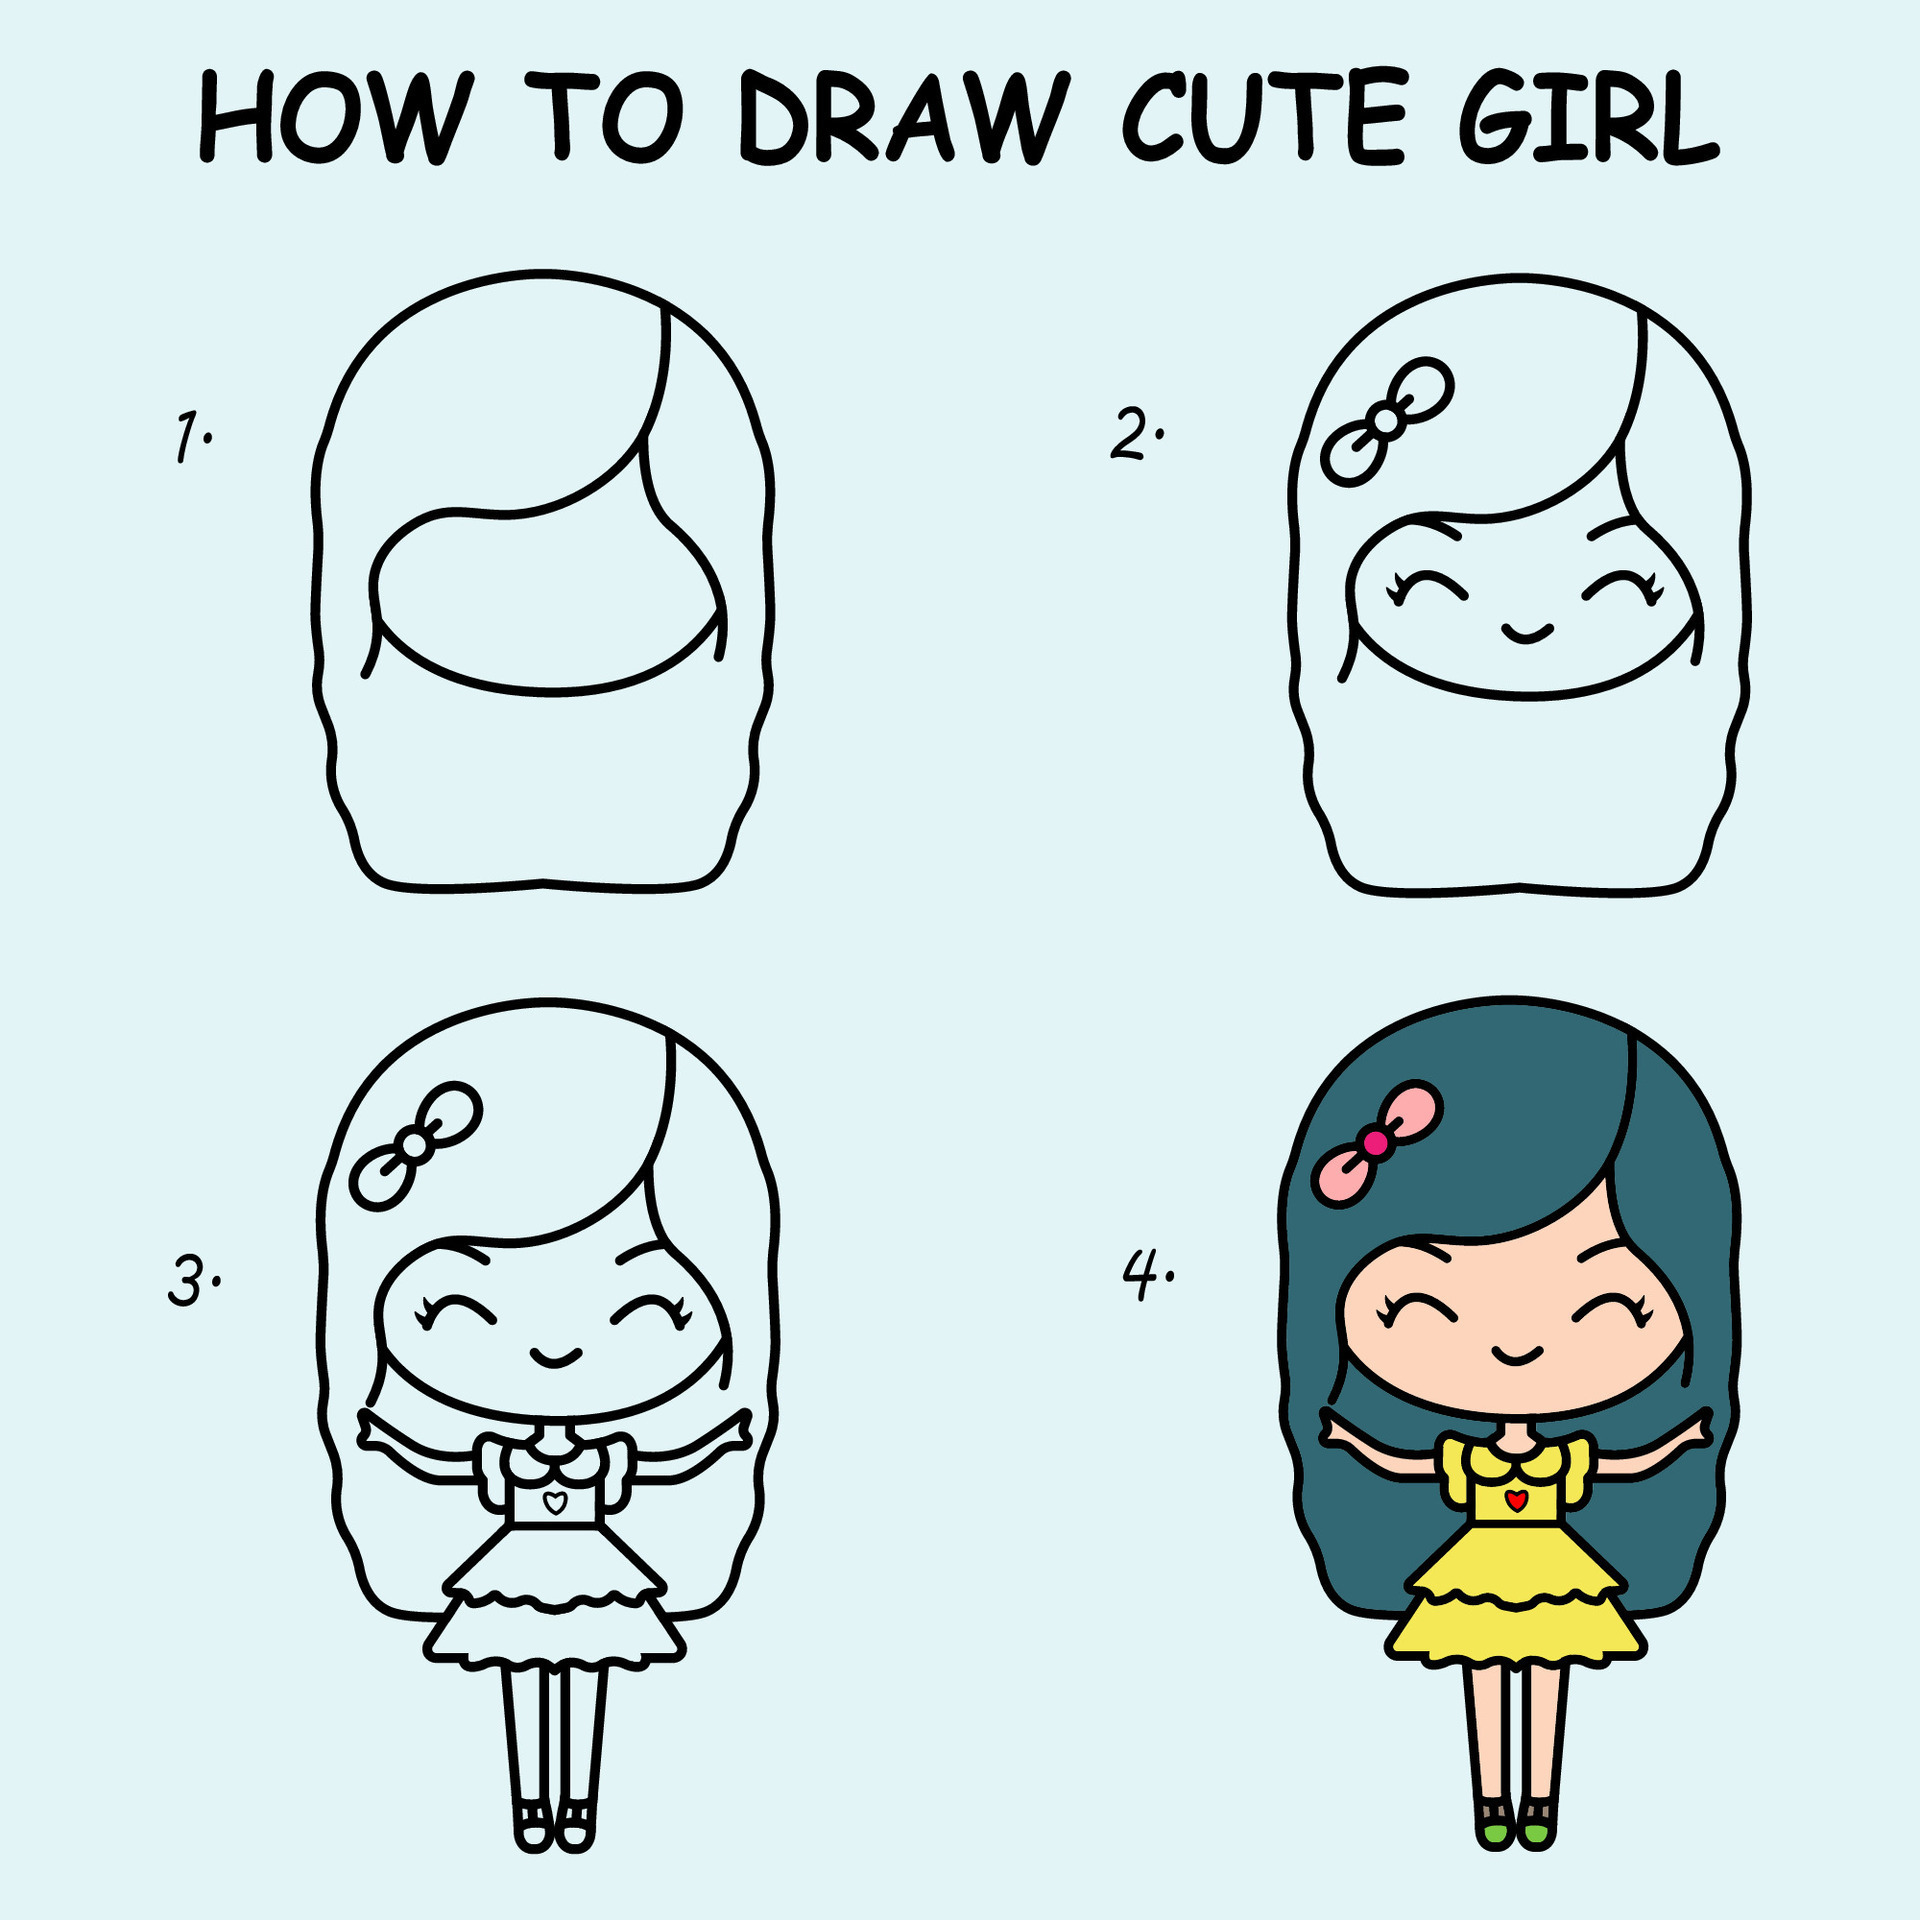 How to Draw a Cute Back to School Girl Easy #2 - YouTube-nextbuild.com.vn